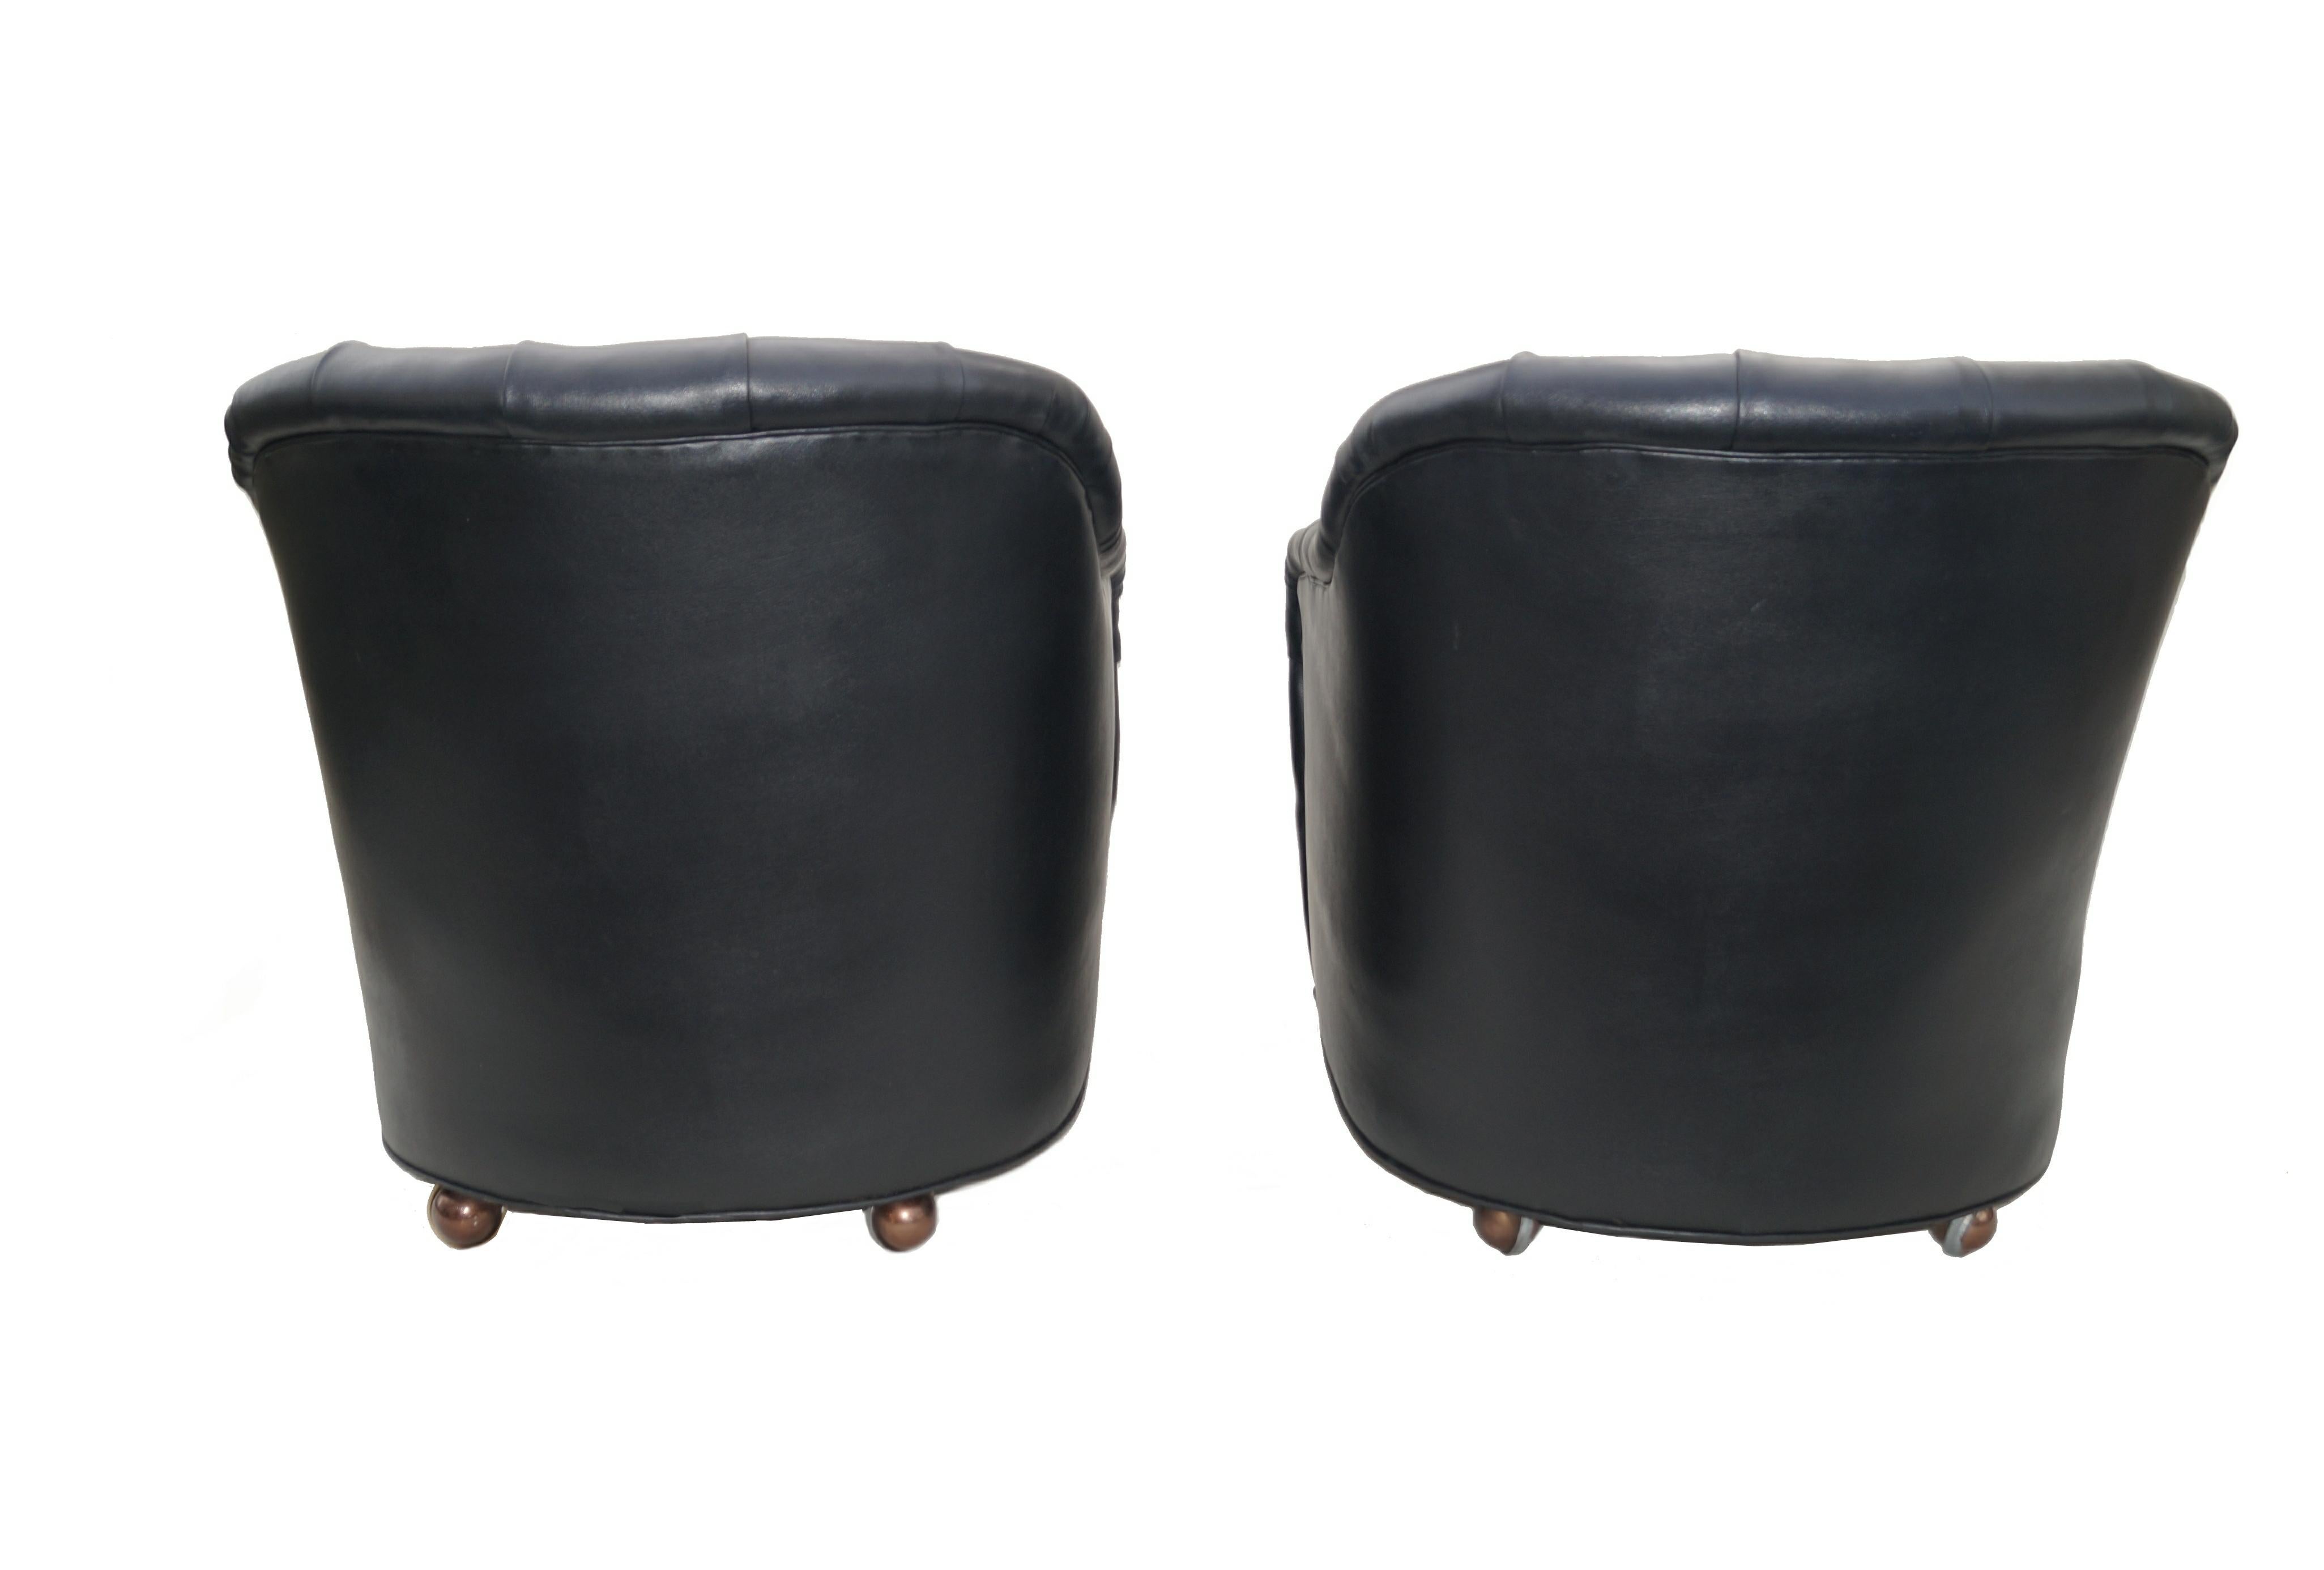 Late 20th Century Pair of Black Mid-Century Modern Ward Bennett Style Tufted Lounge Chairs Casters